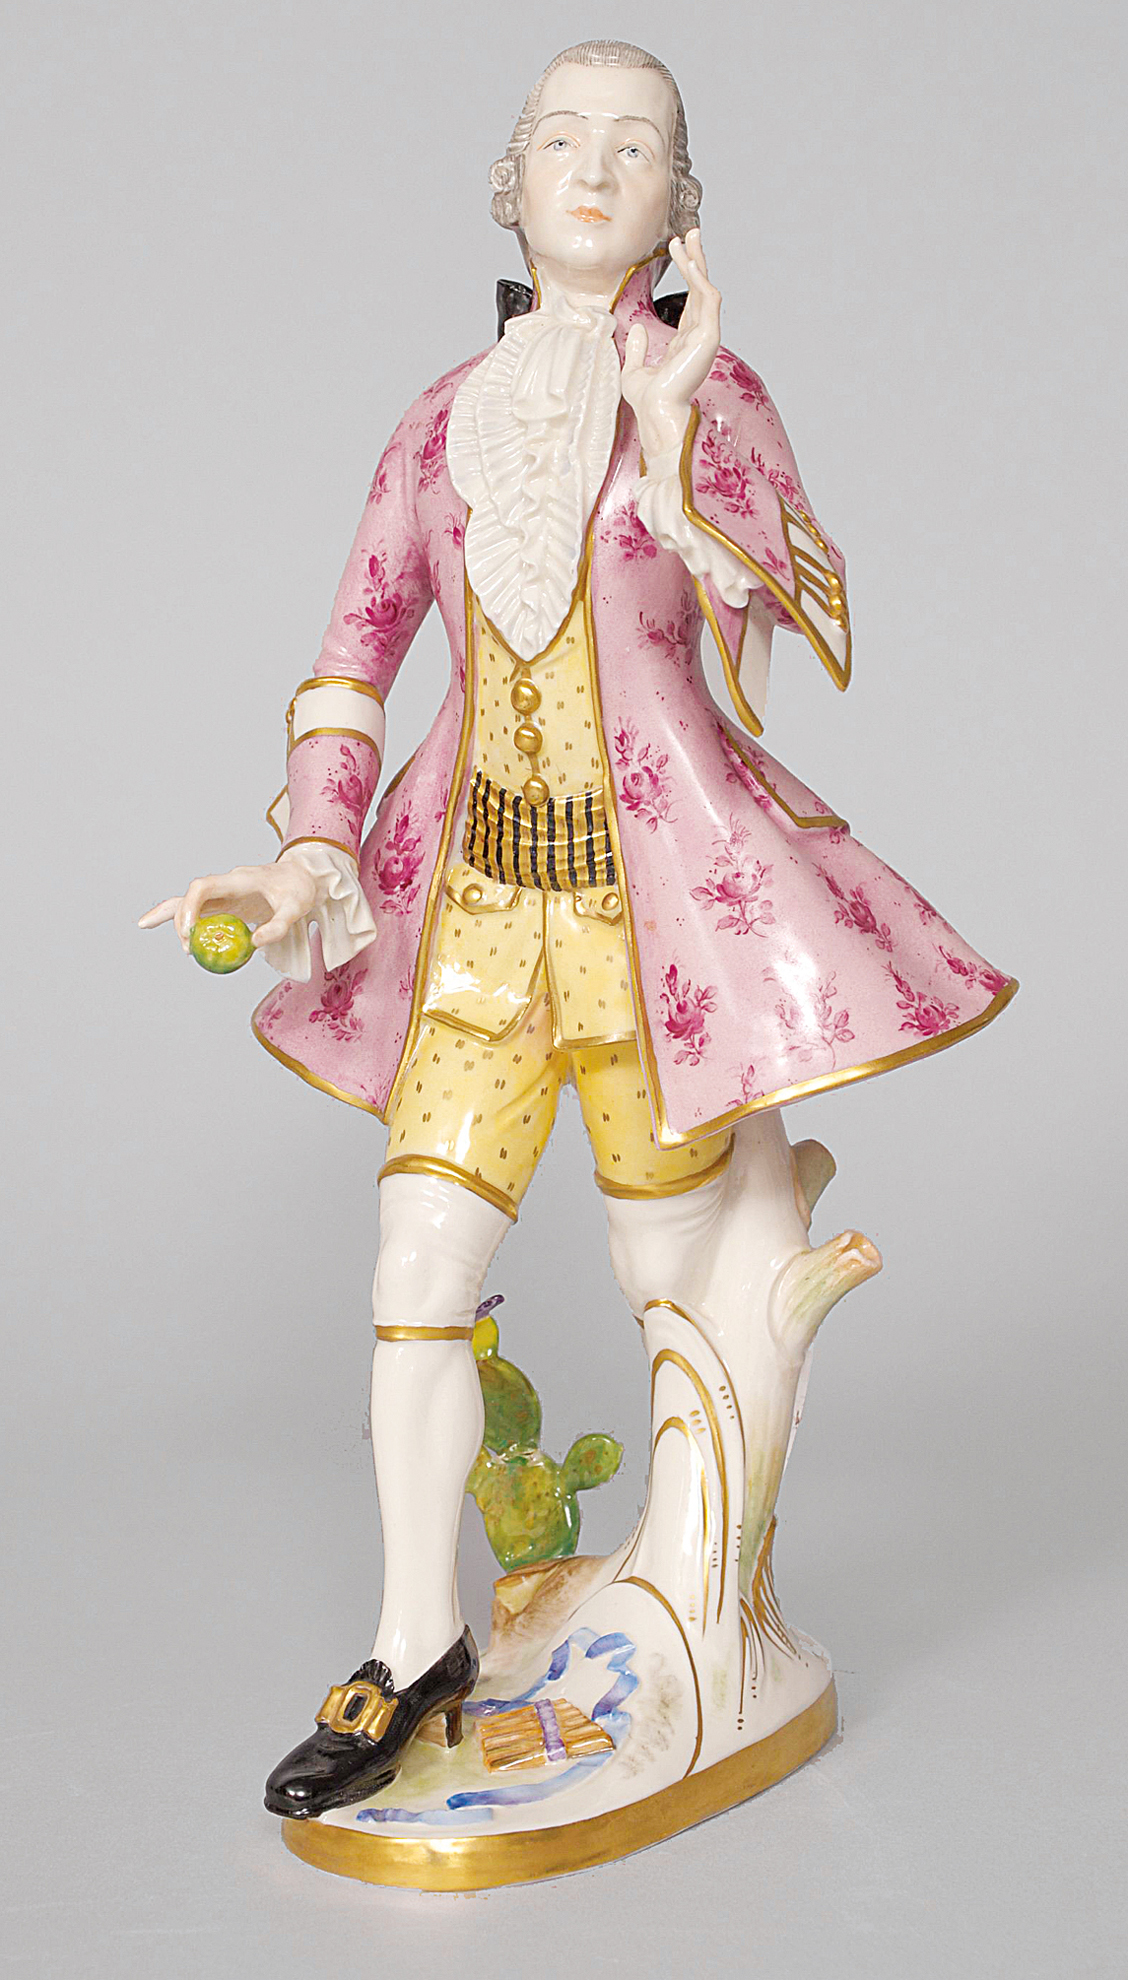 A large figure of Mozart